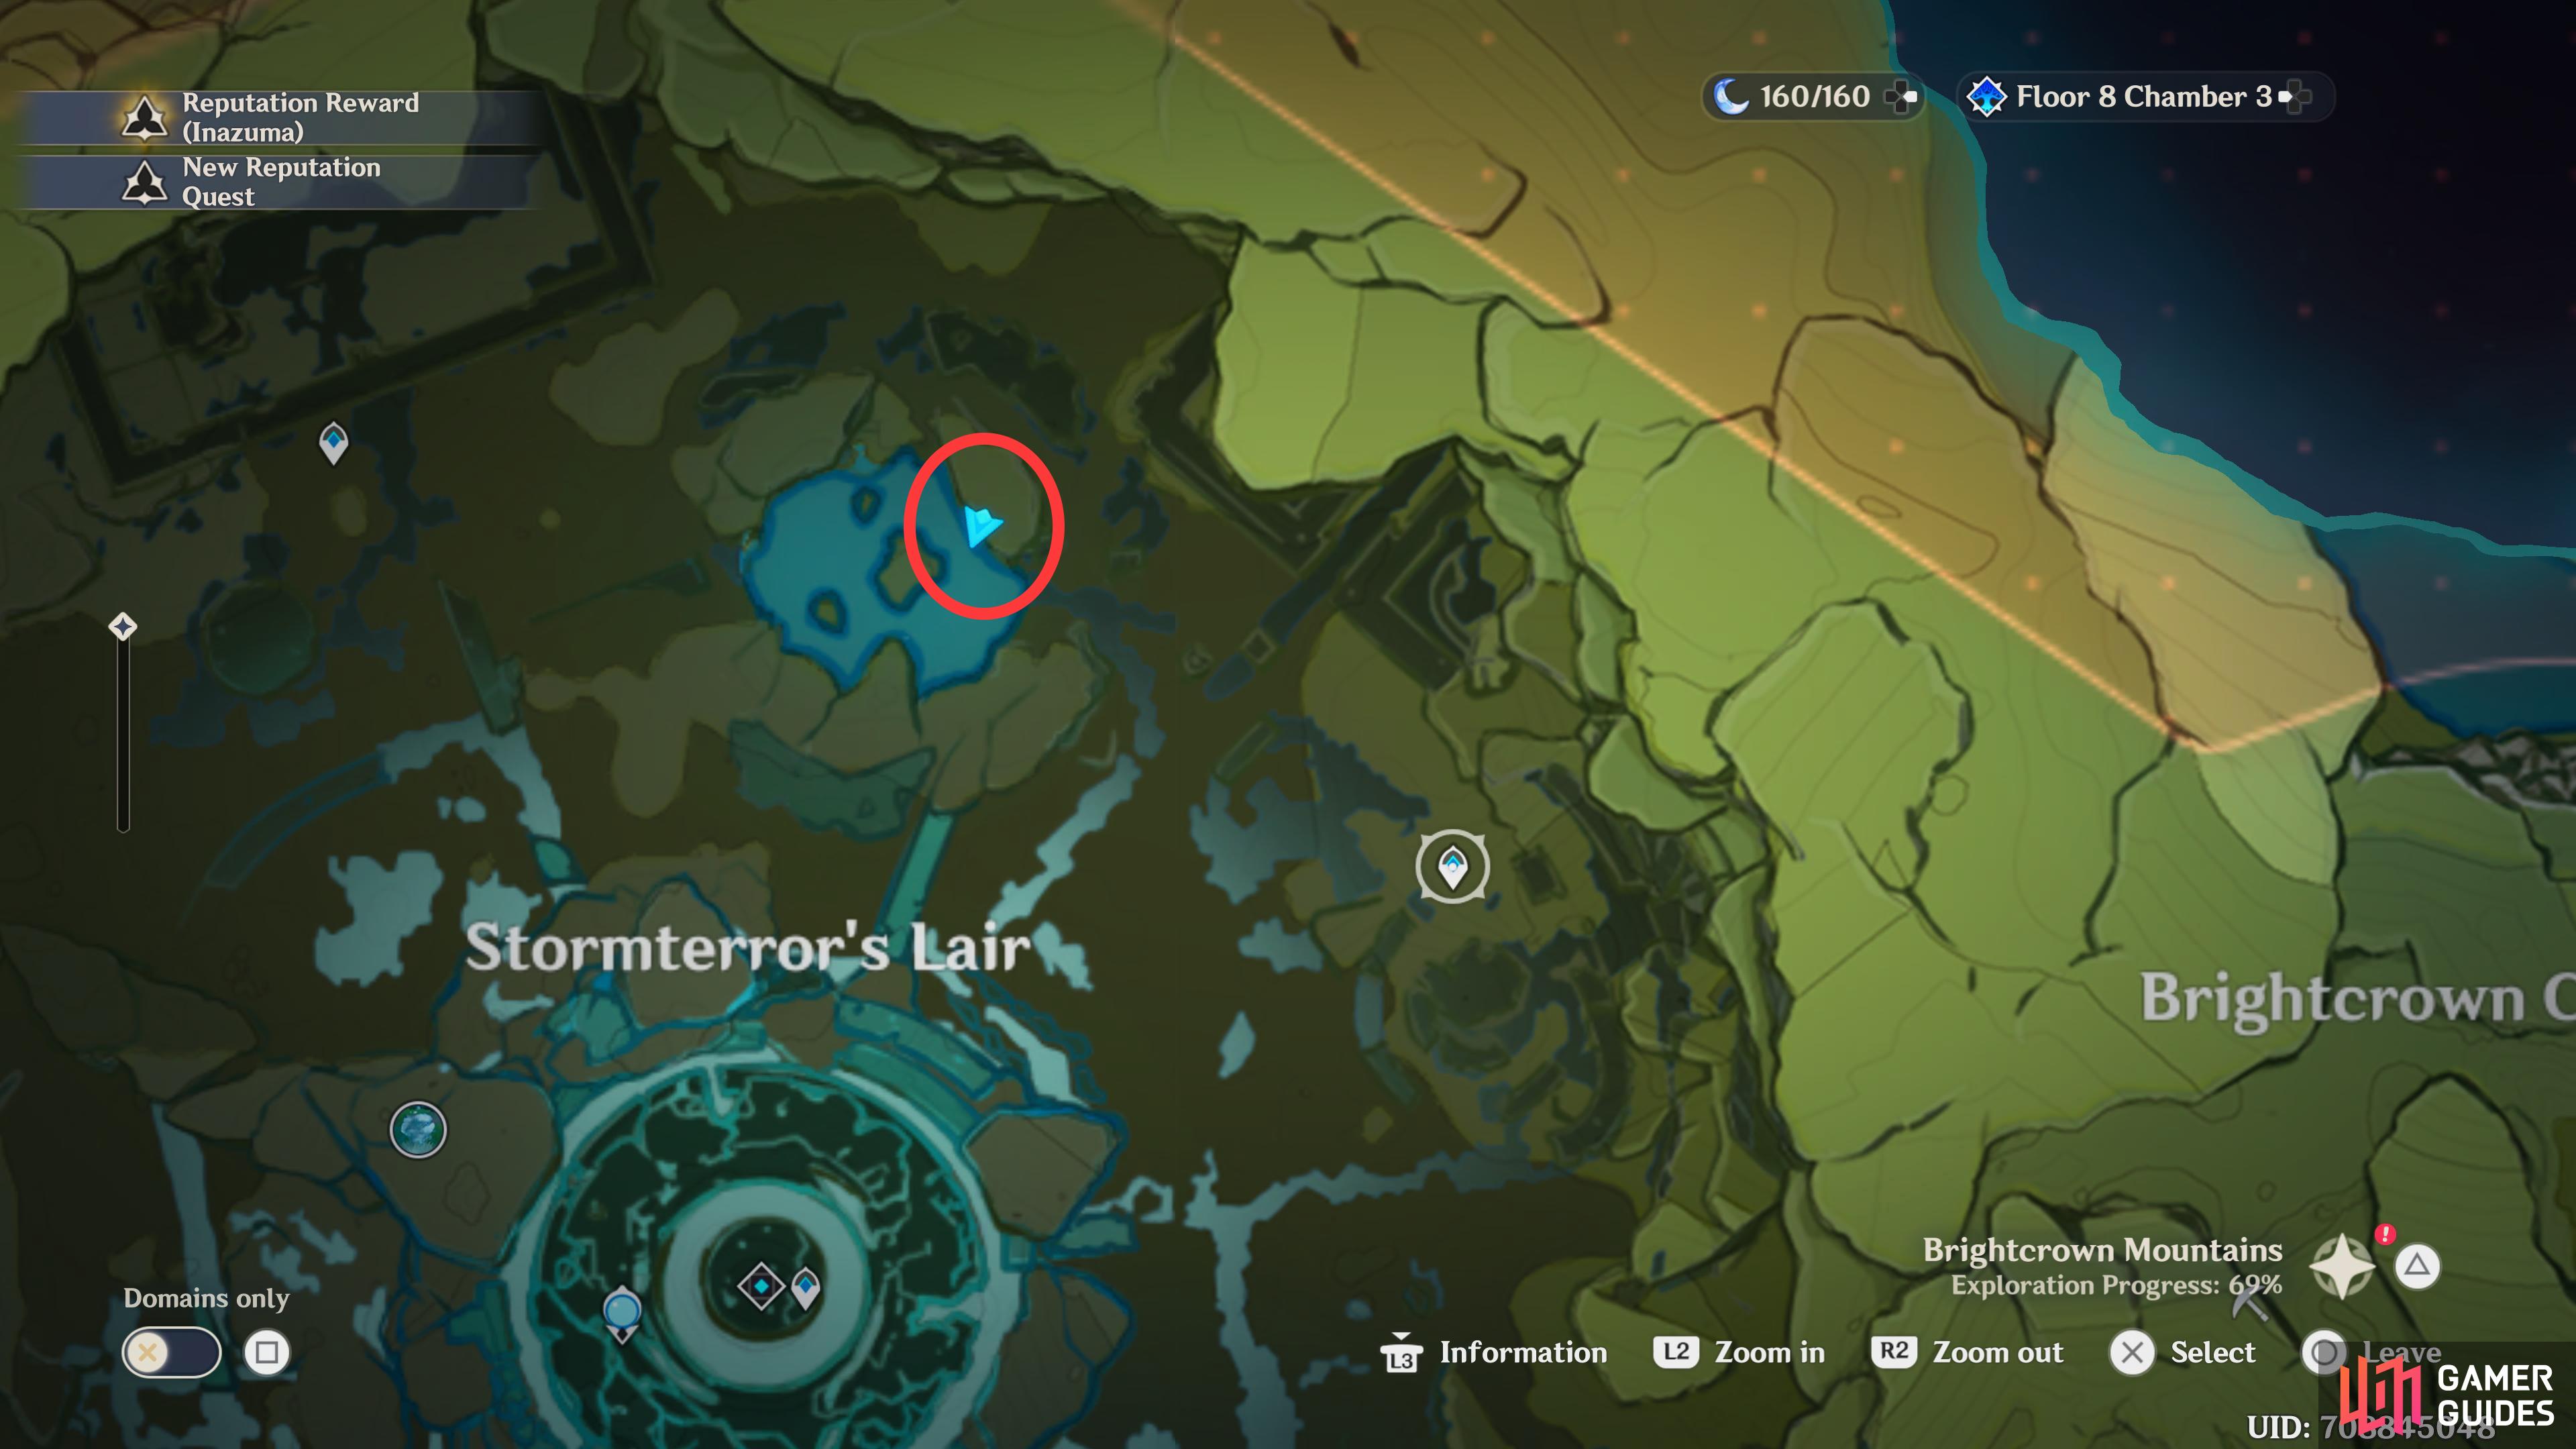 The Northeast Stormterror's Lair Fishing Point is in the lake just to the northeast of the Statue of the Seven.